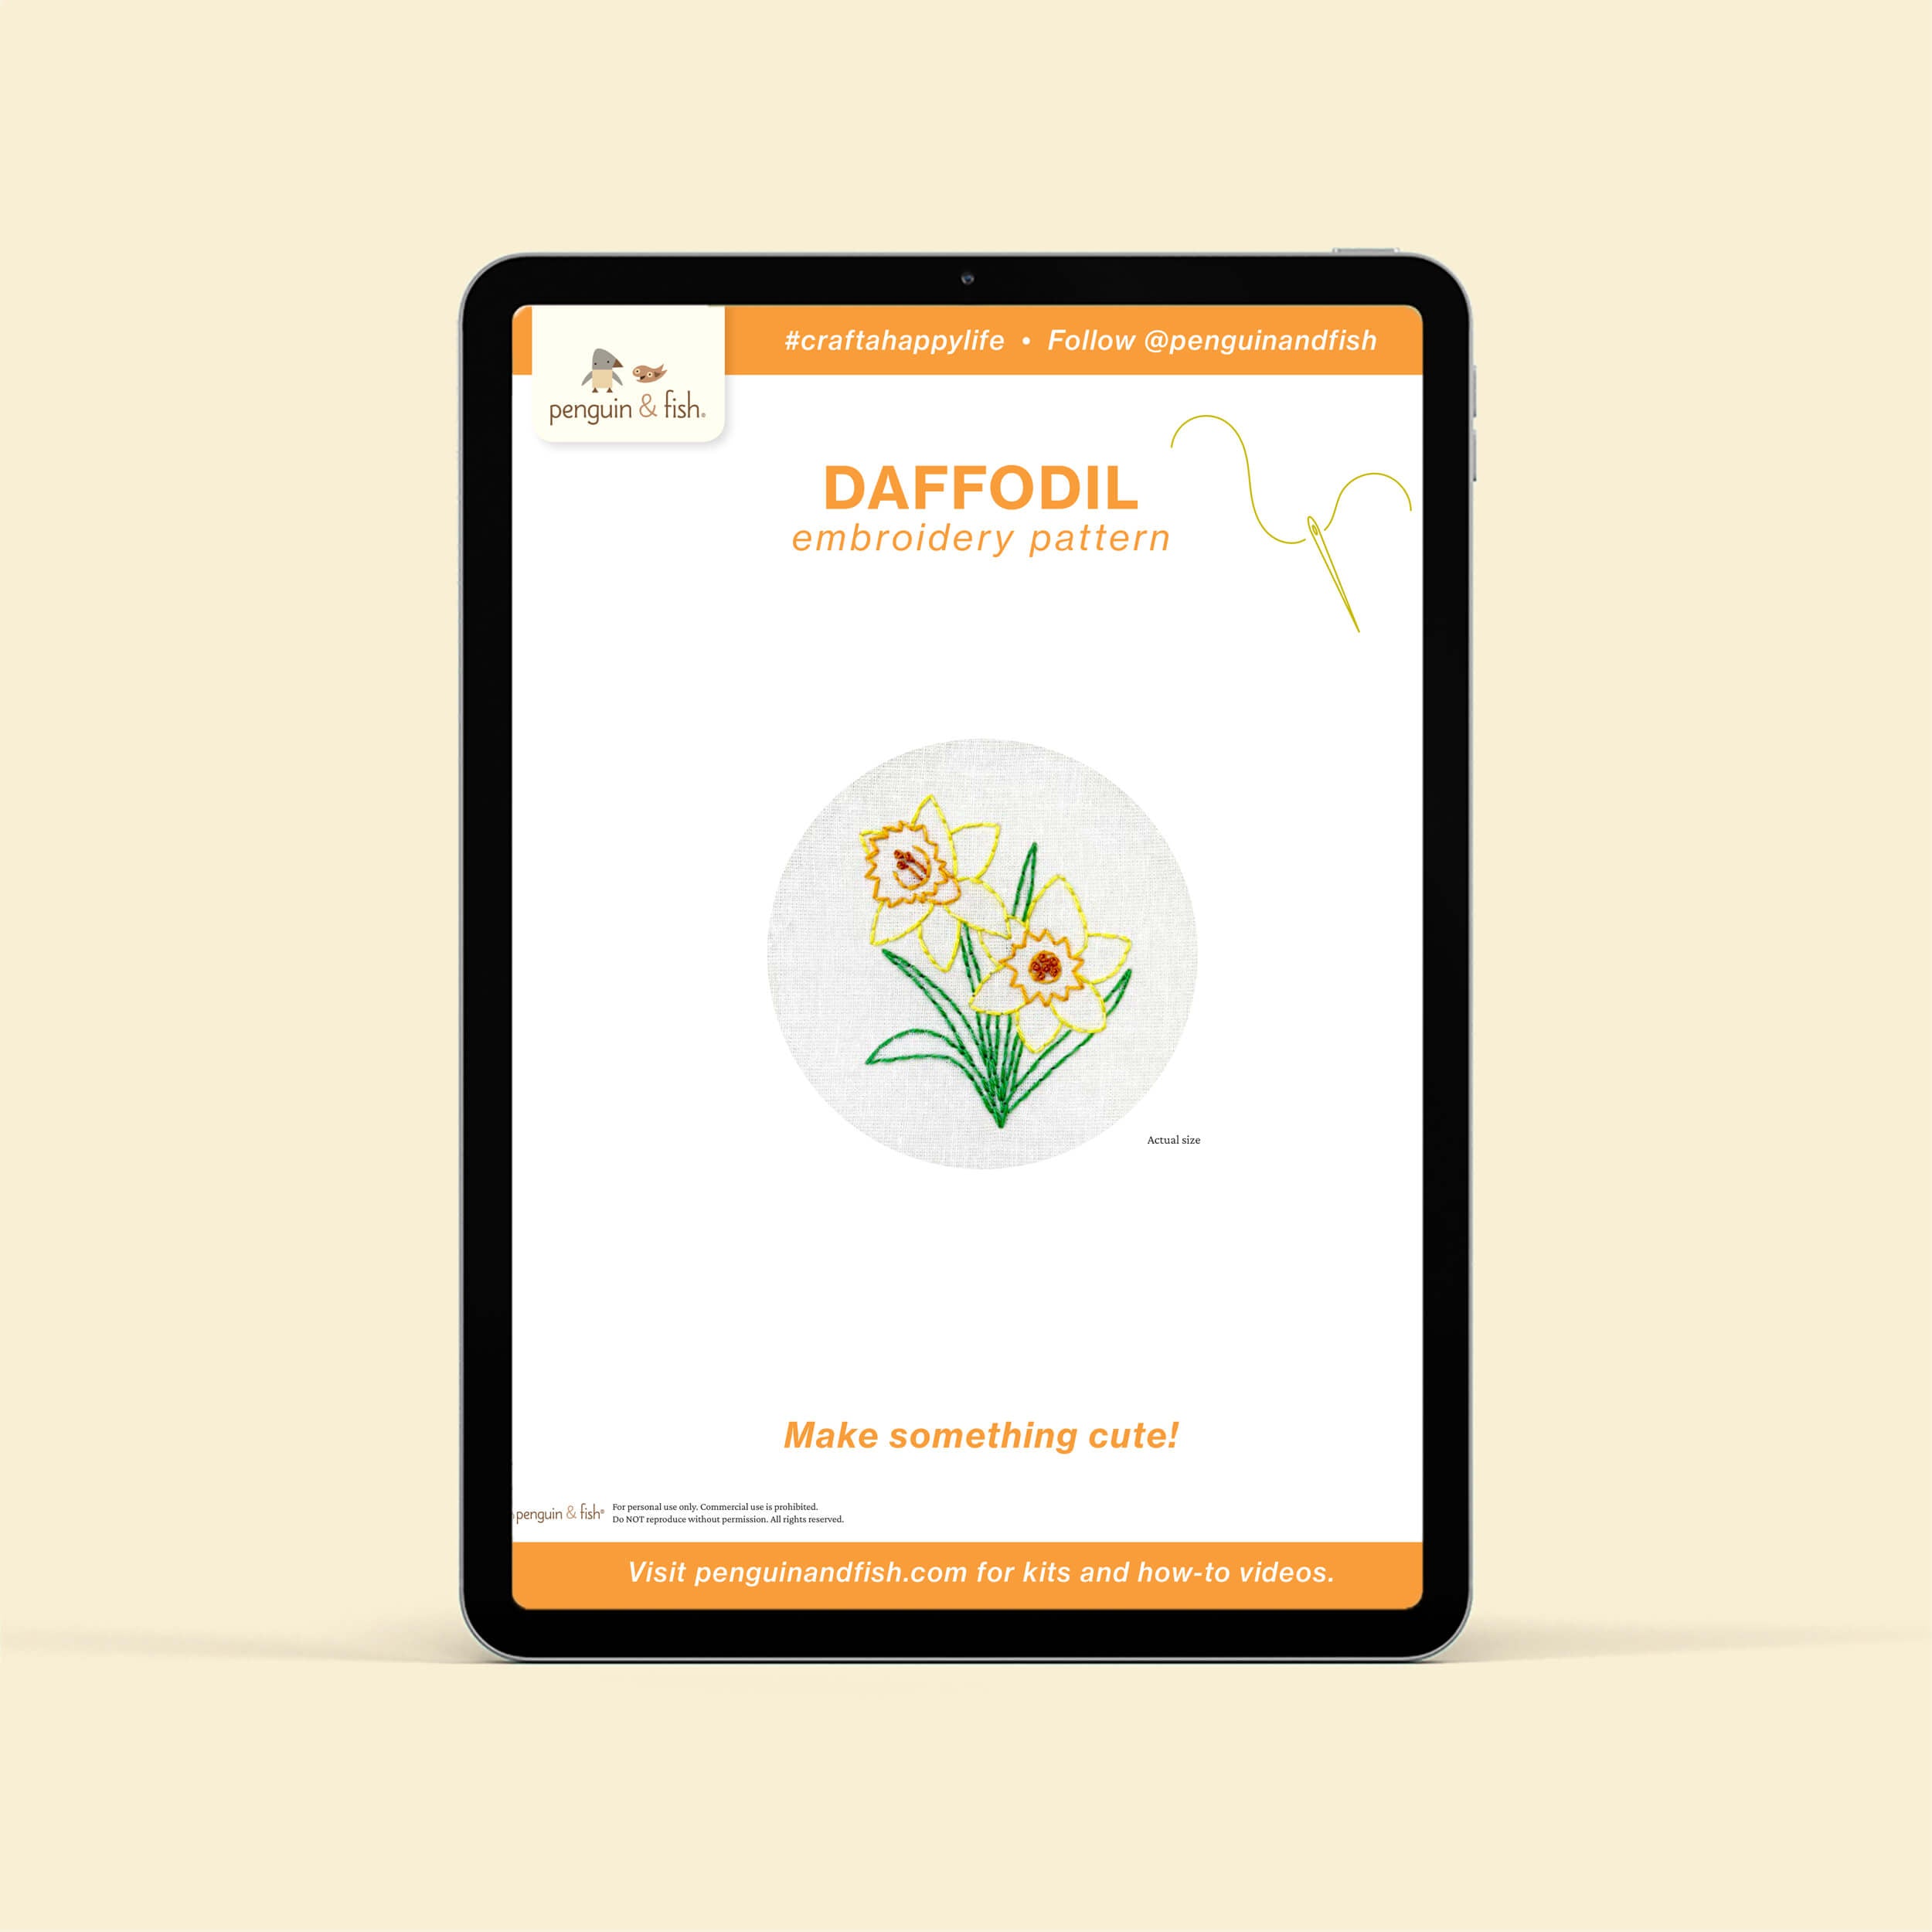 Daffodil PDF embroidery pattern shown on a tablet